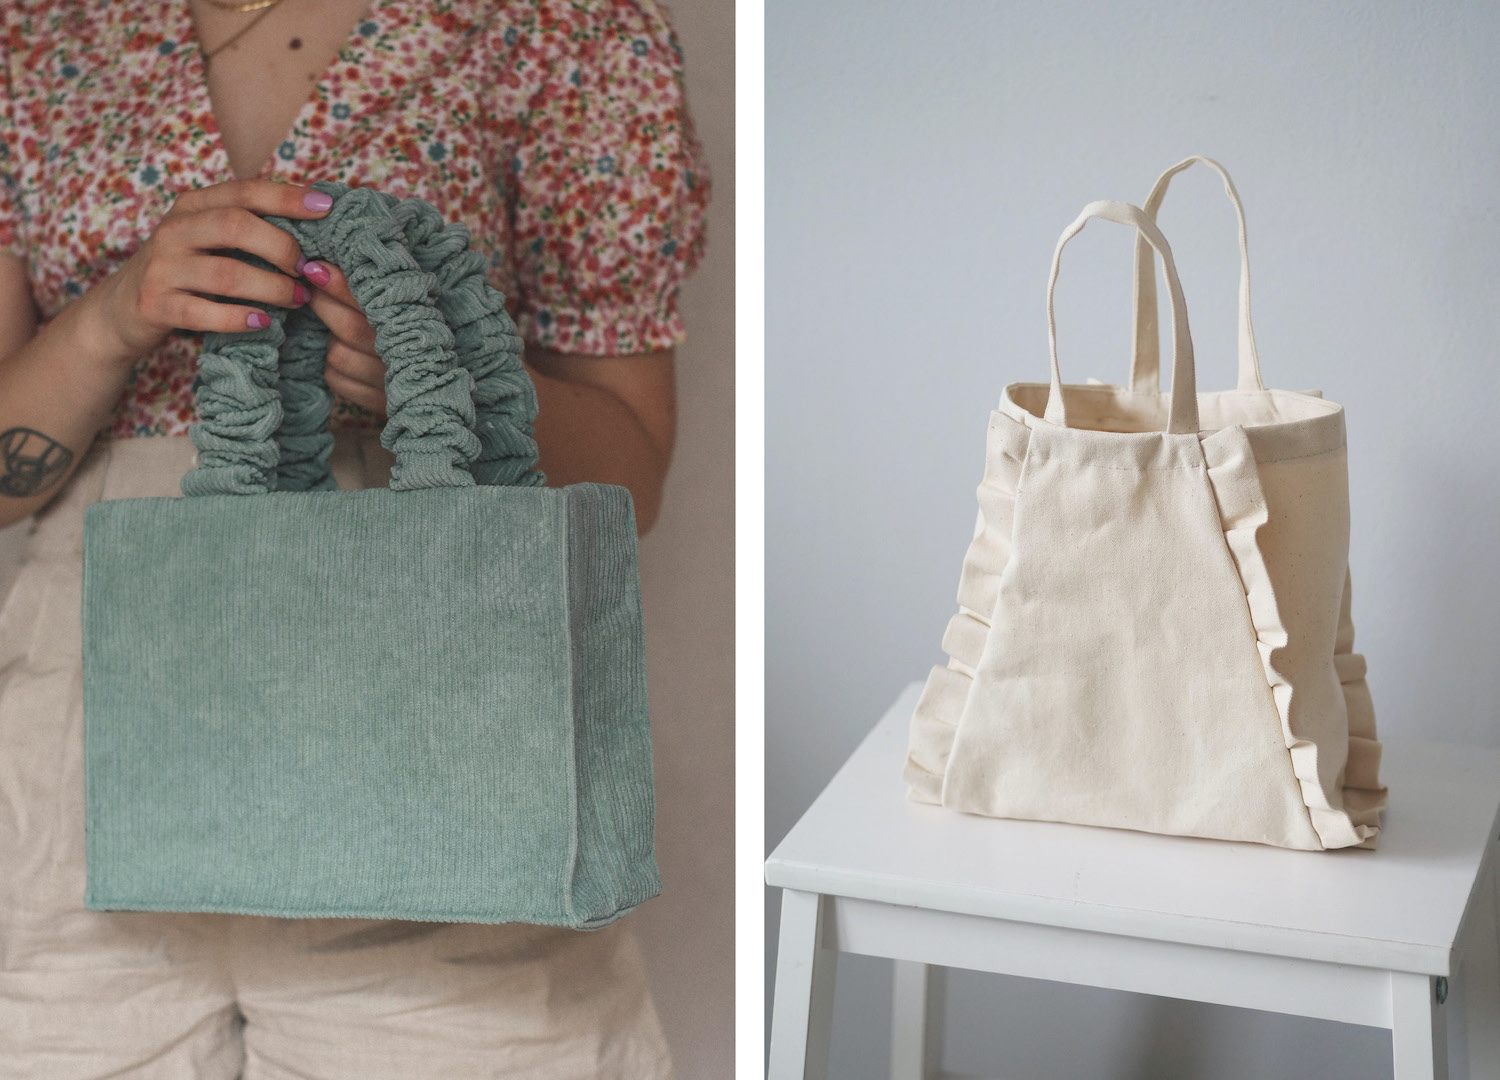 Add a #MeMade Touch to Any Outfit with These Sweet Bag Patterns